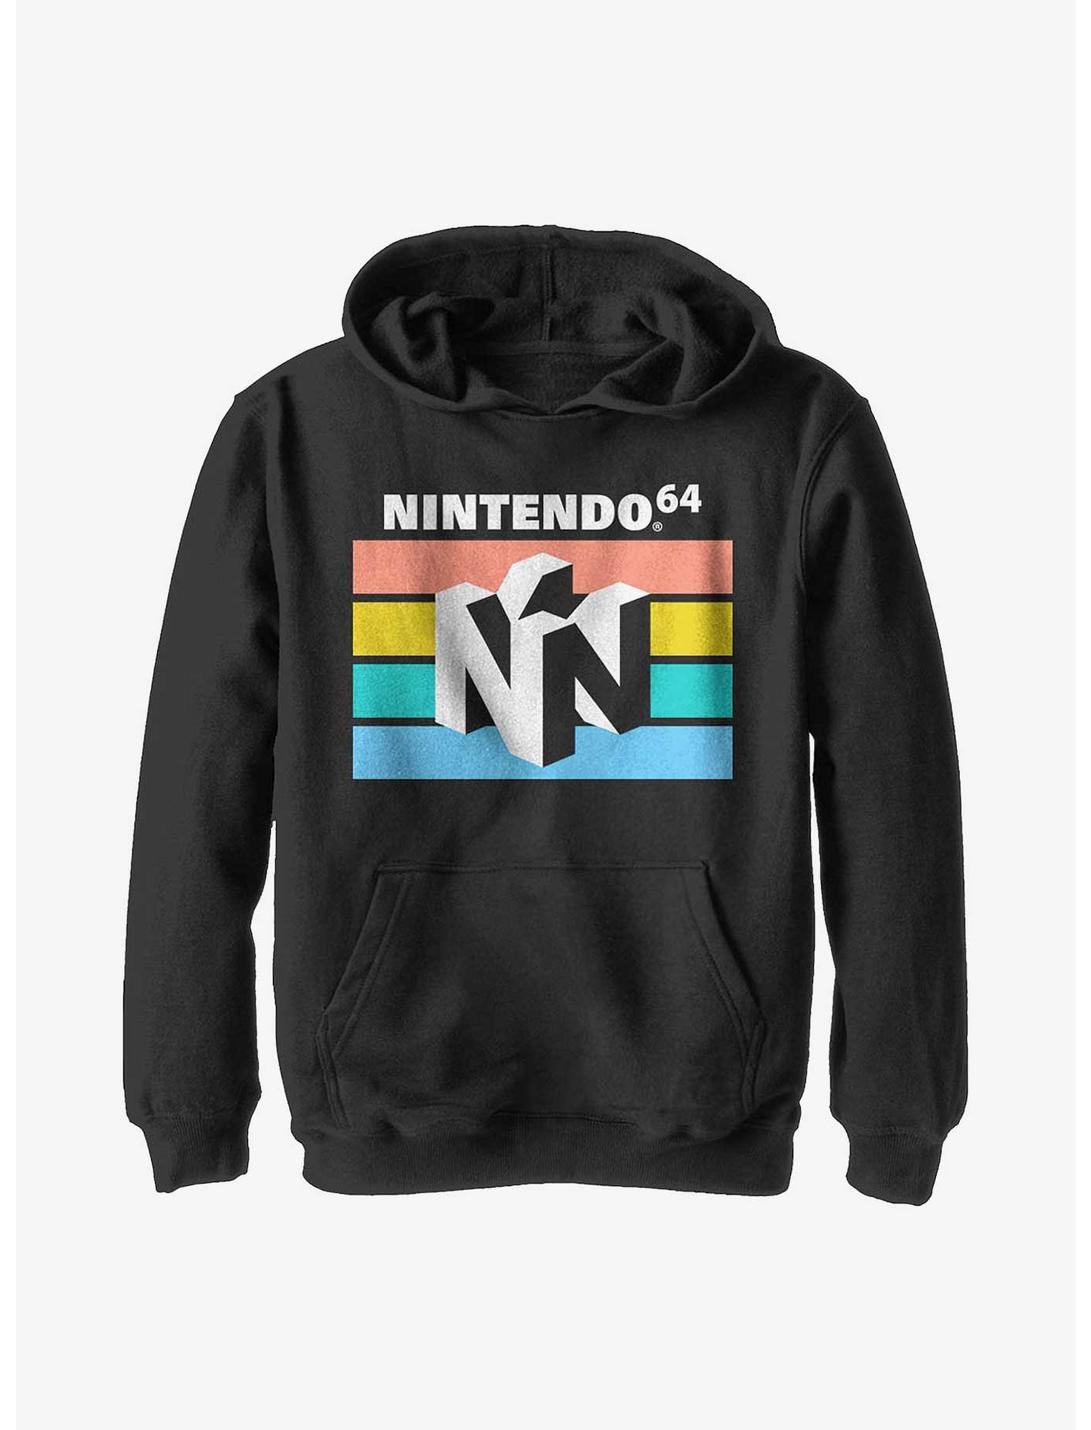 Nintendo Only The Best Youth Hoodie, BLACK, hi-res